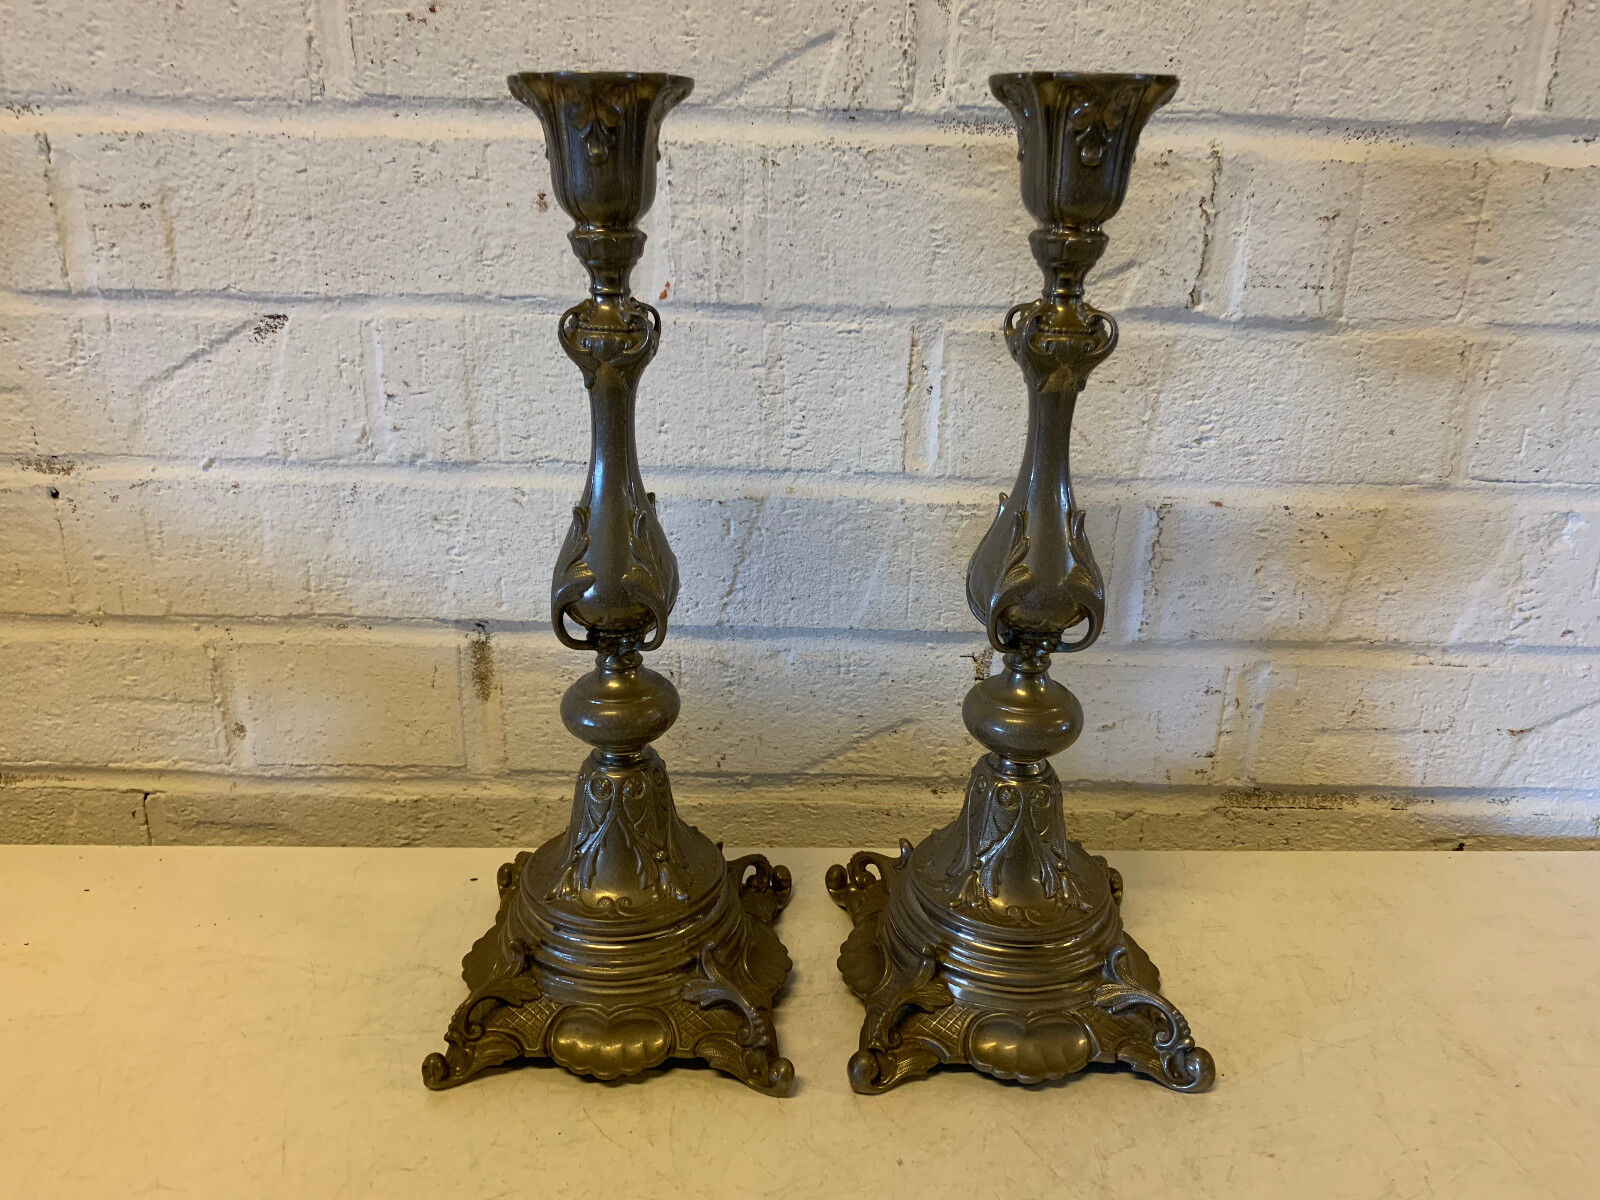 Antique Pair of Pewter or Tin Stylized Candle Sticks / Candle Holders